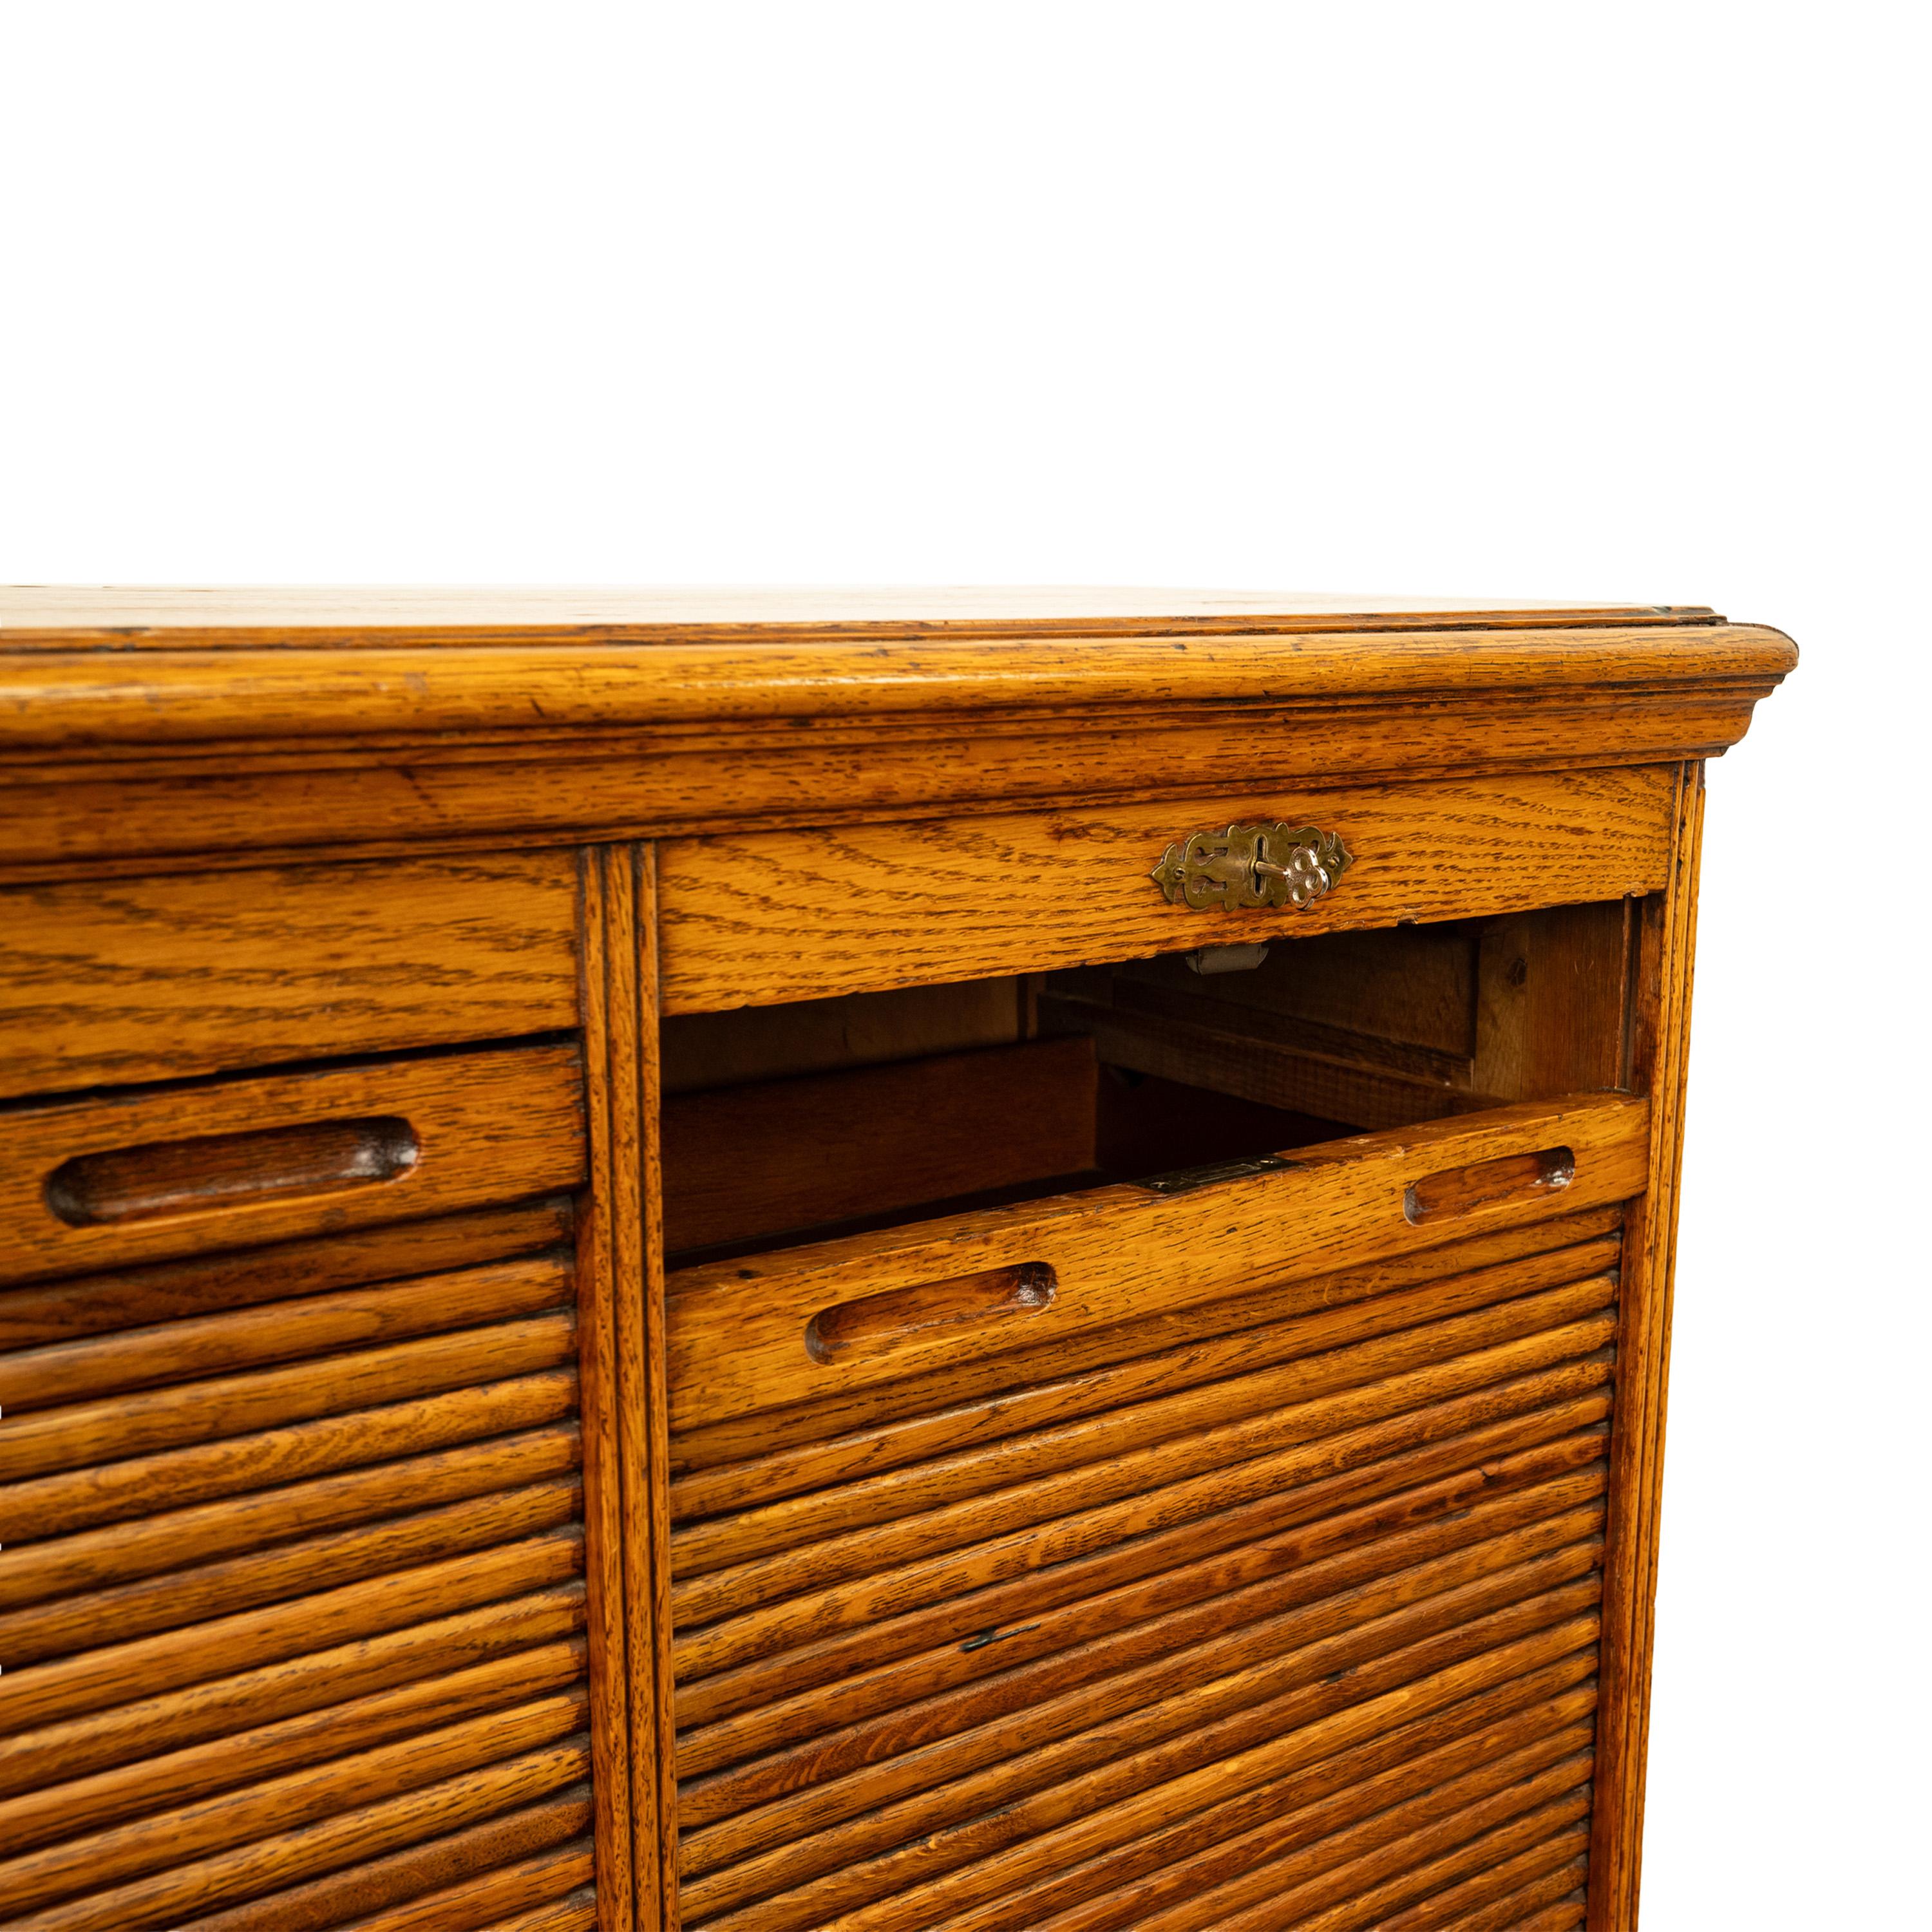 Antique American Oak Double Tambour Roll Top 16 Drawer Filing Cabinet 1910 For Sale 10